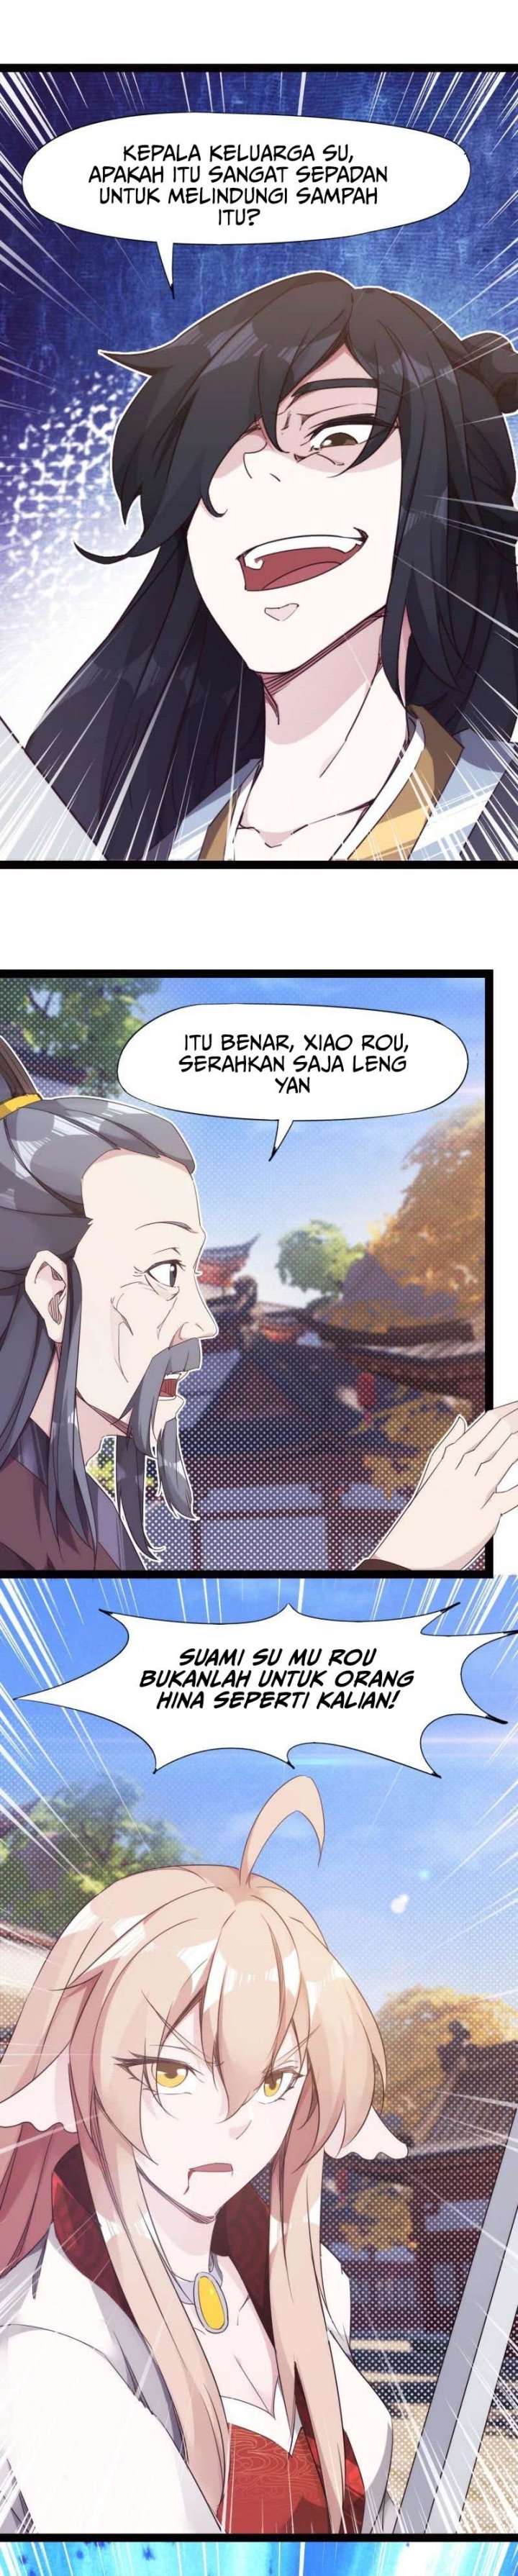 Path Of The Sword Chapter 13 - 151